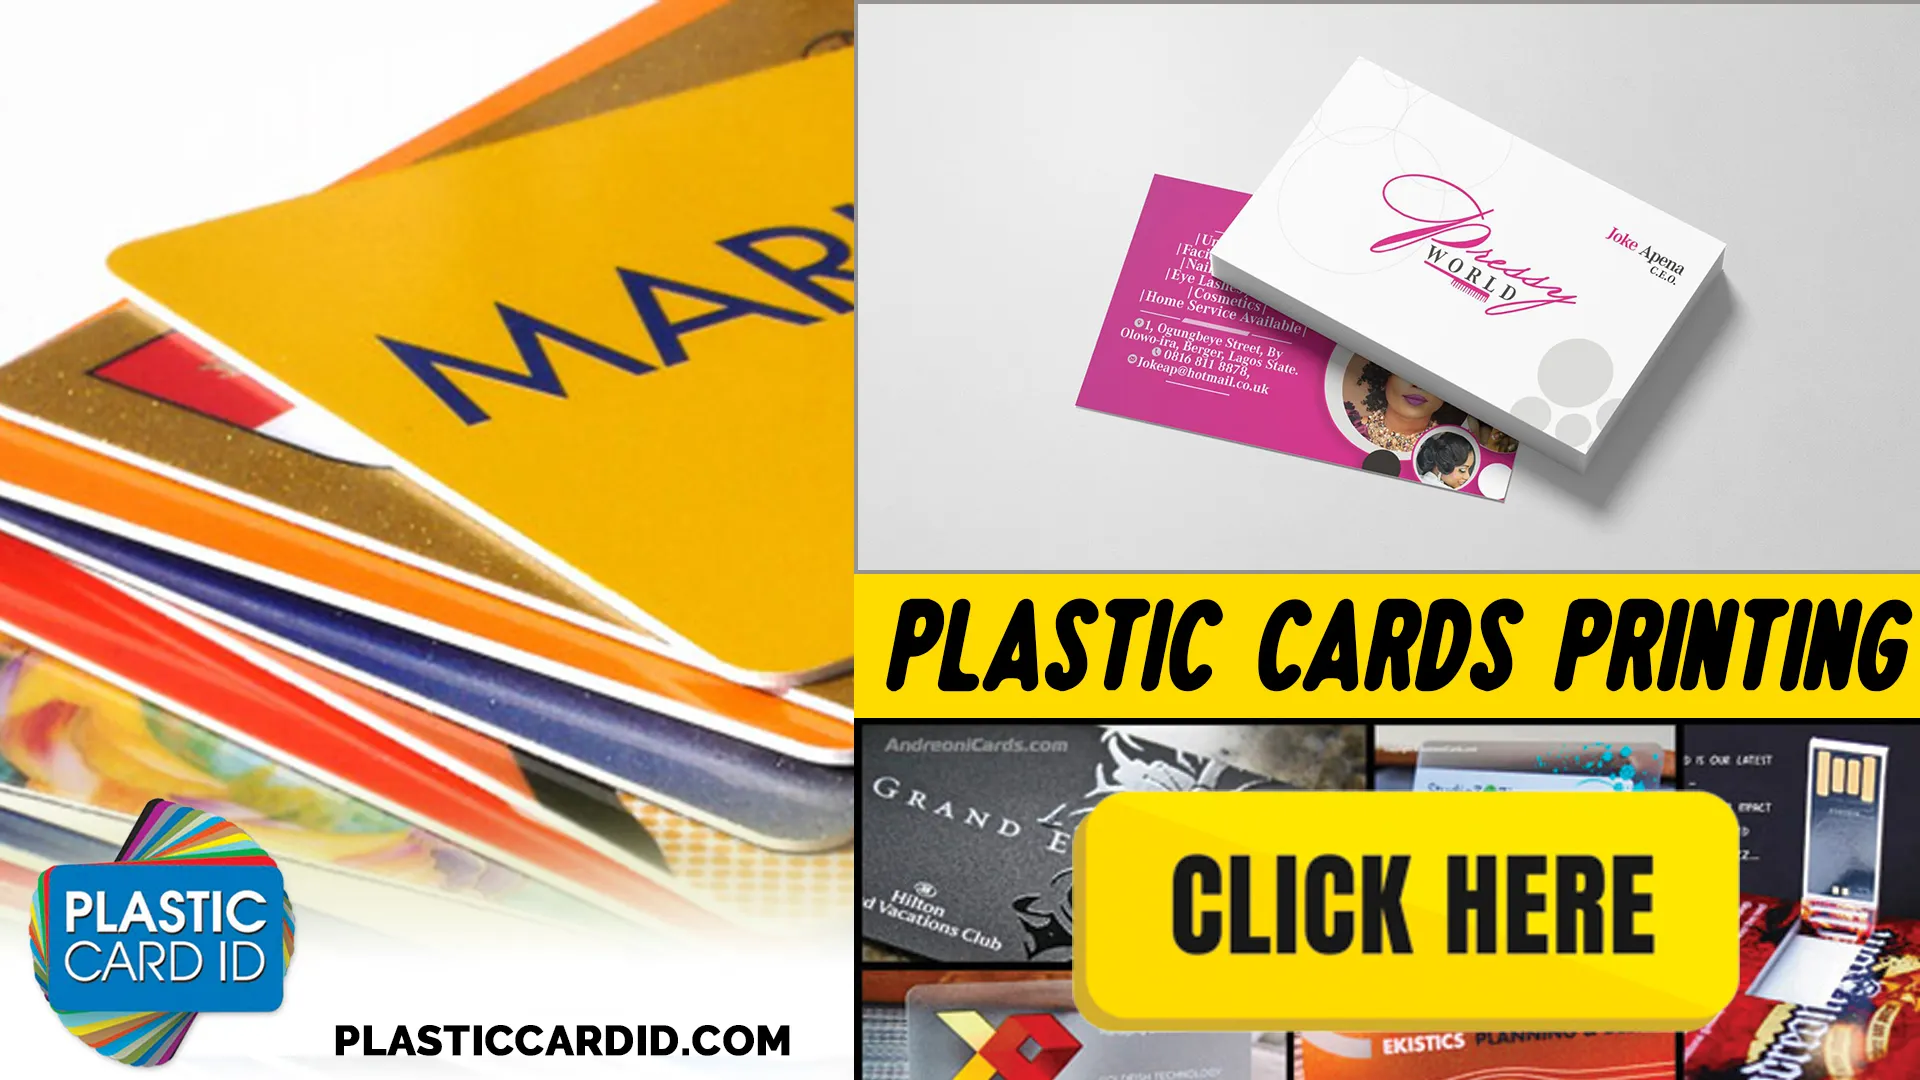 Transforming Brand Perception with Innovative Plastic Cards